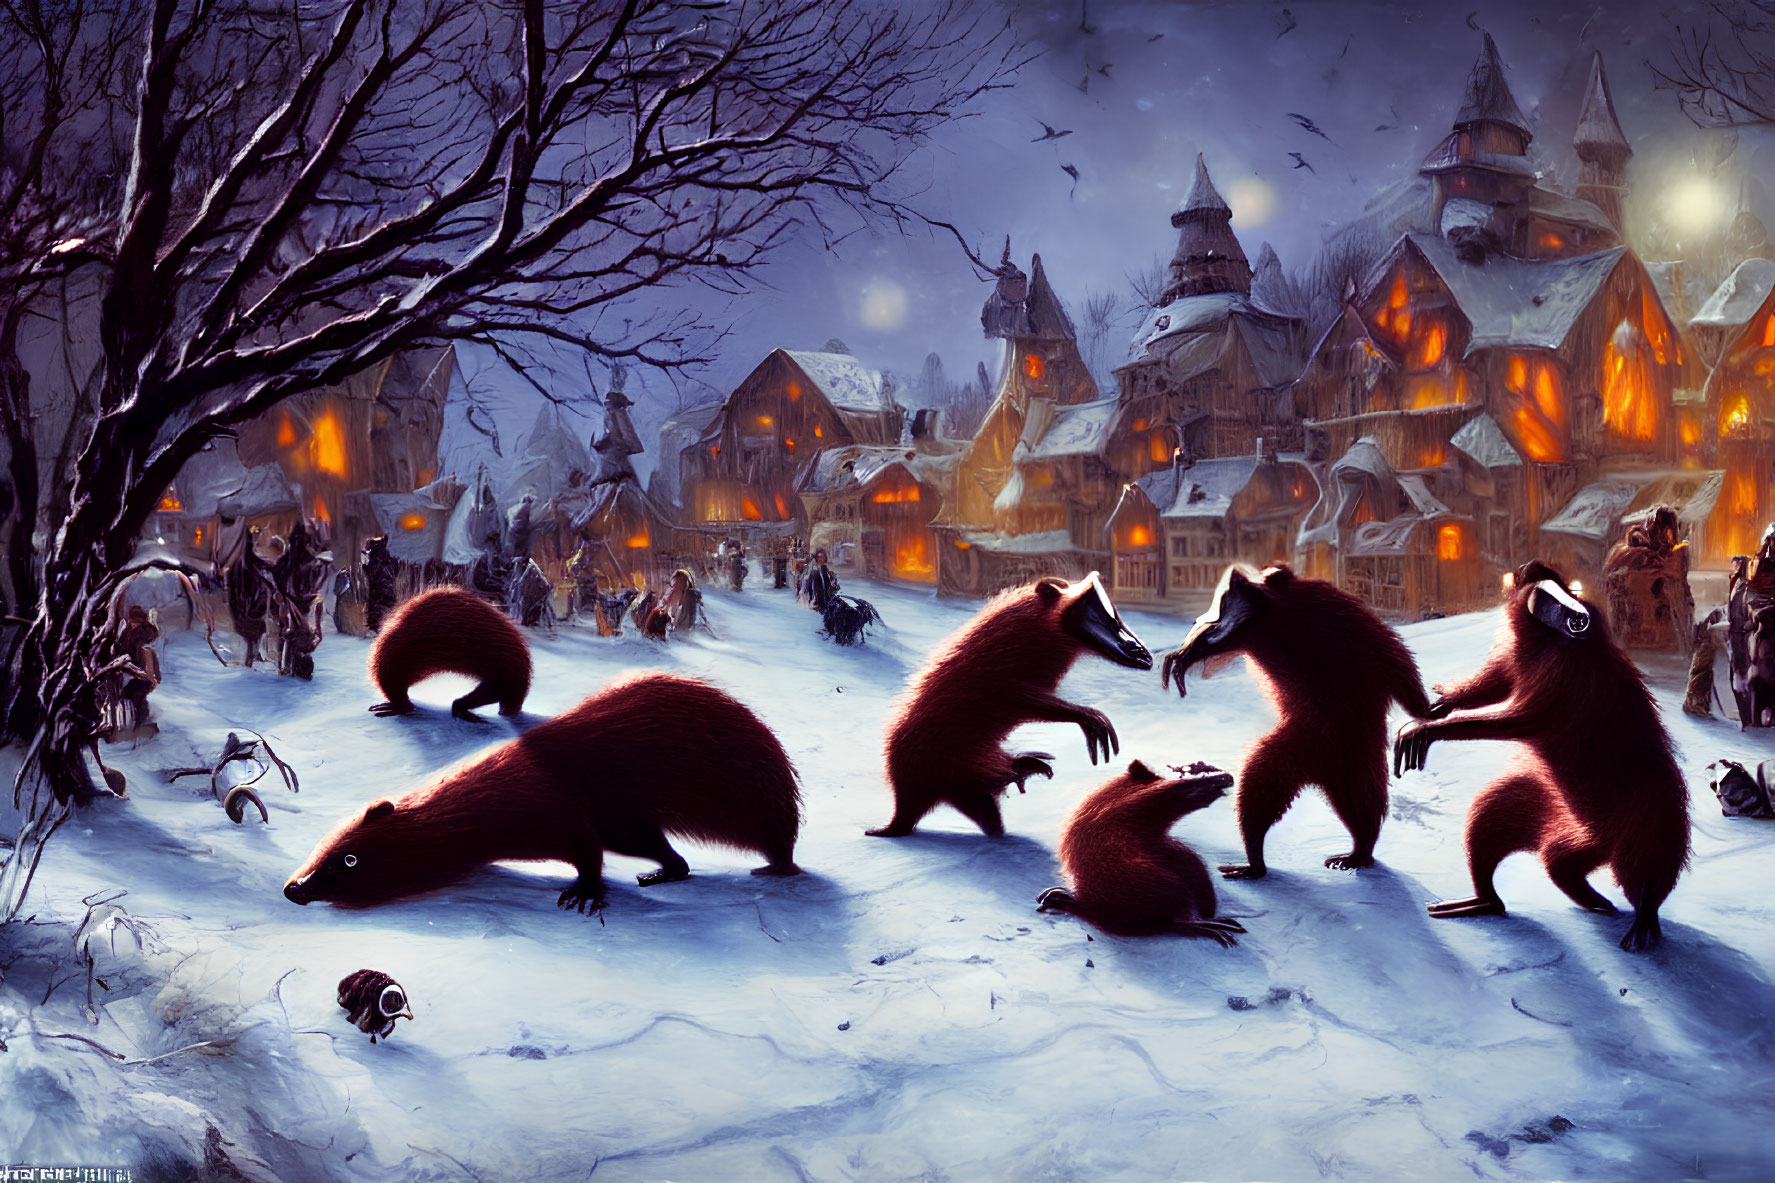 Illustration of oversized anteaters in snowy village setting